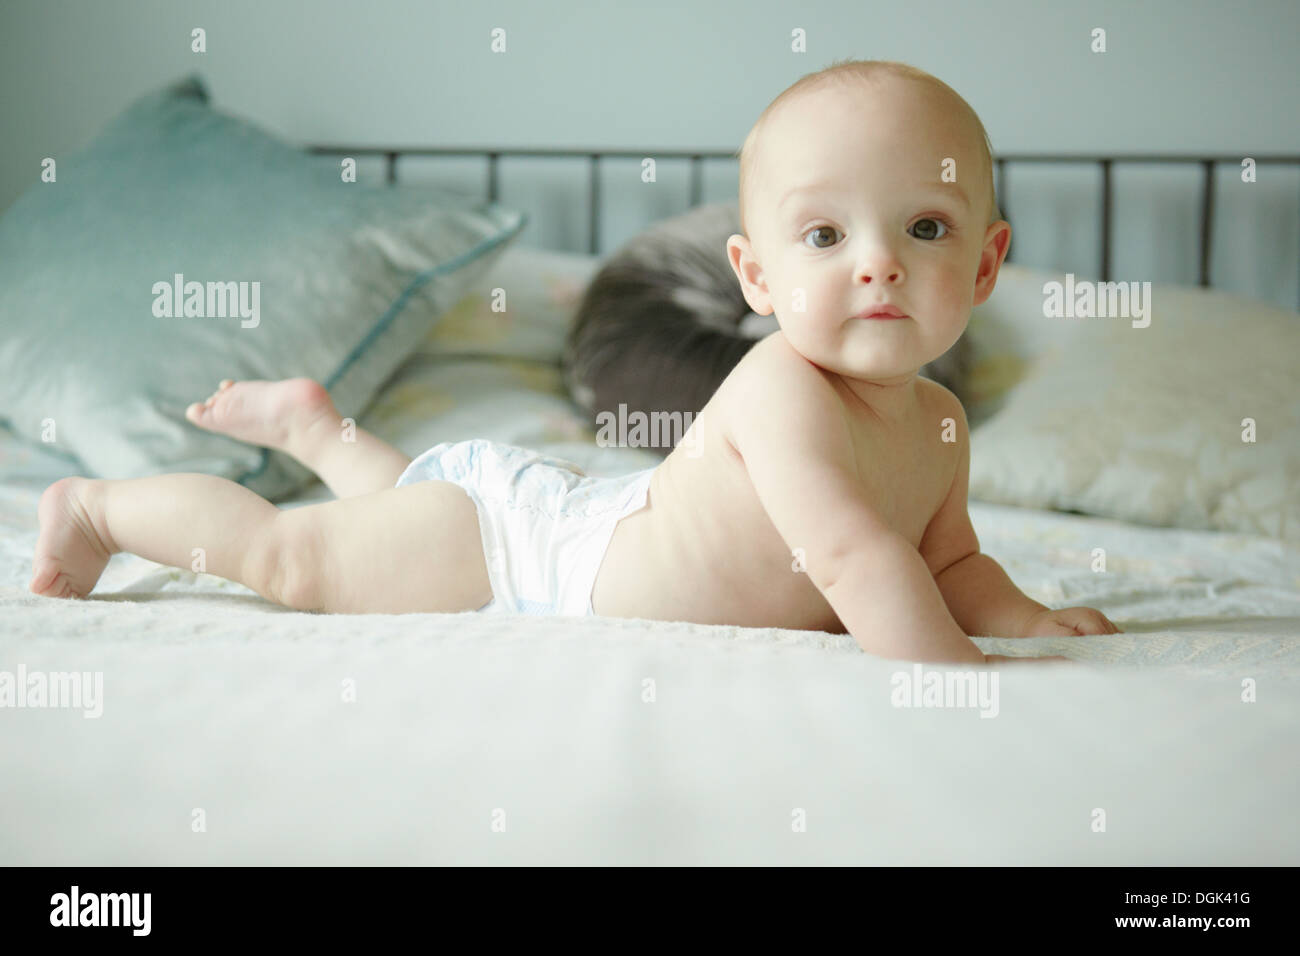 Baby boy lying on front on bed Stock Photo